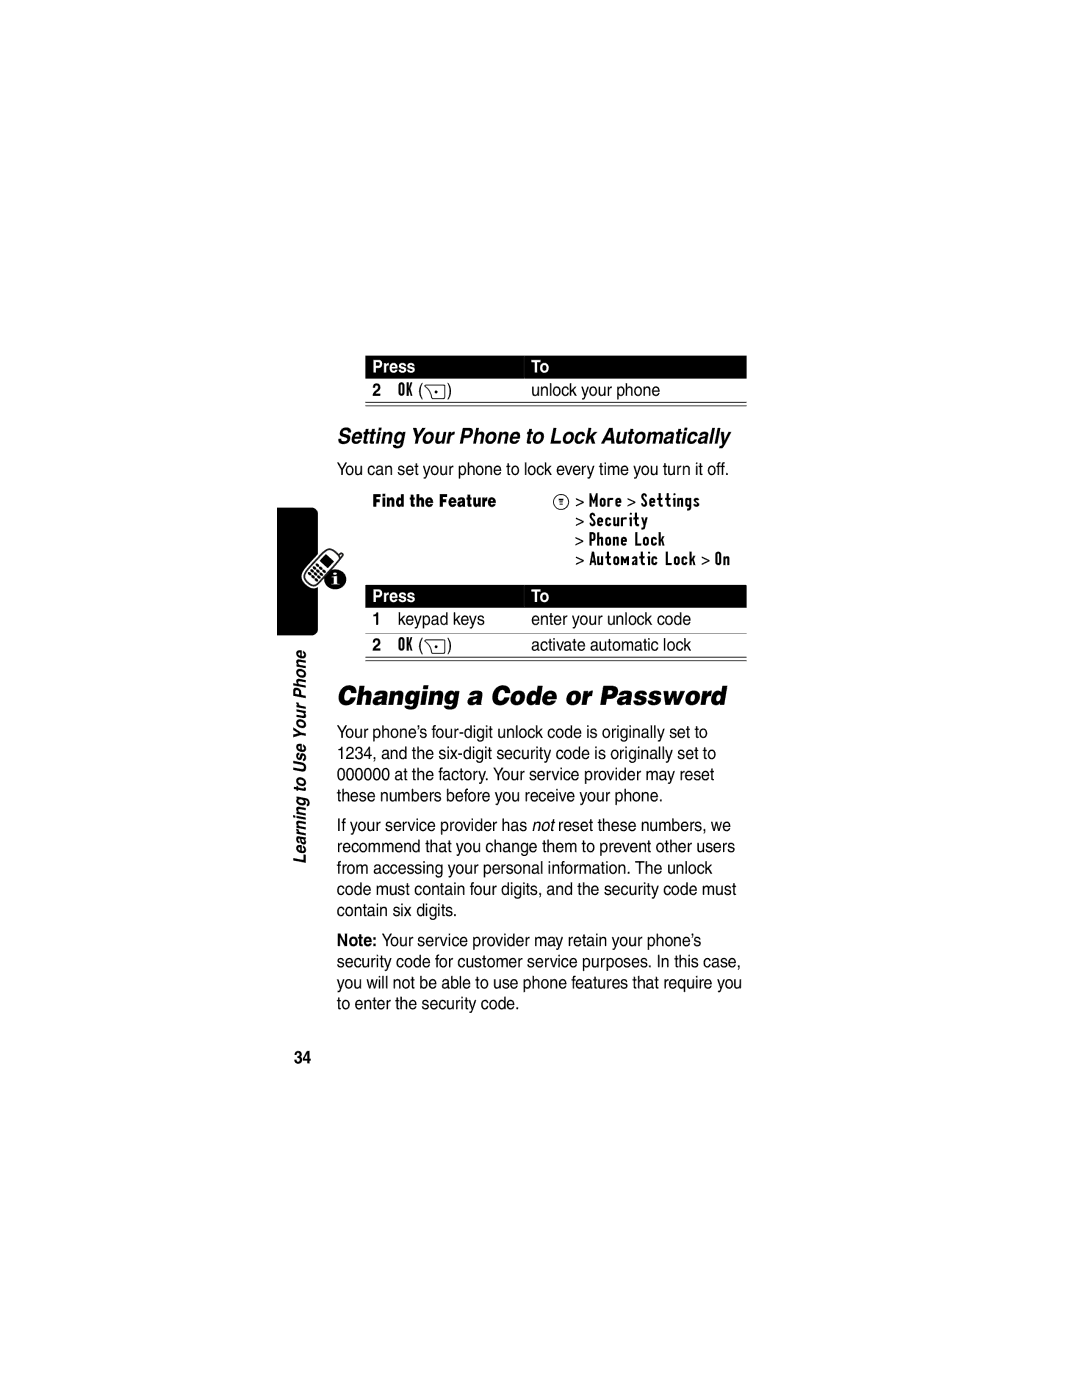 Motorola C353 manual Changing a Code or Password, Setting Your Phone to Lock Automatically 